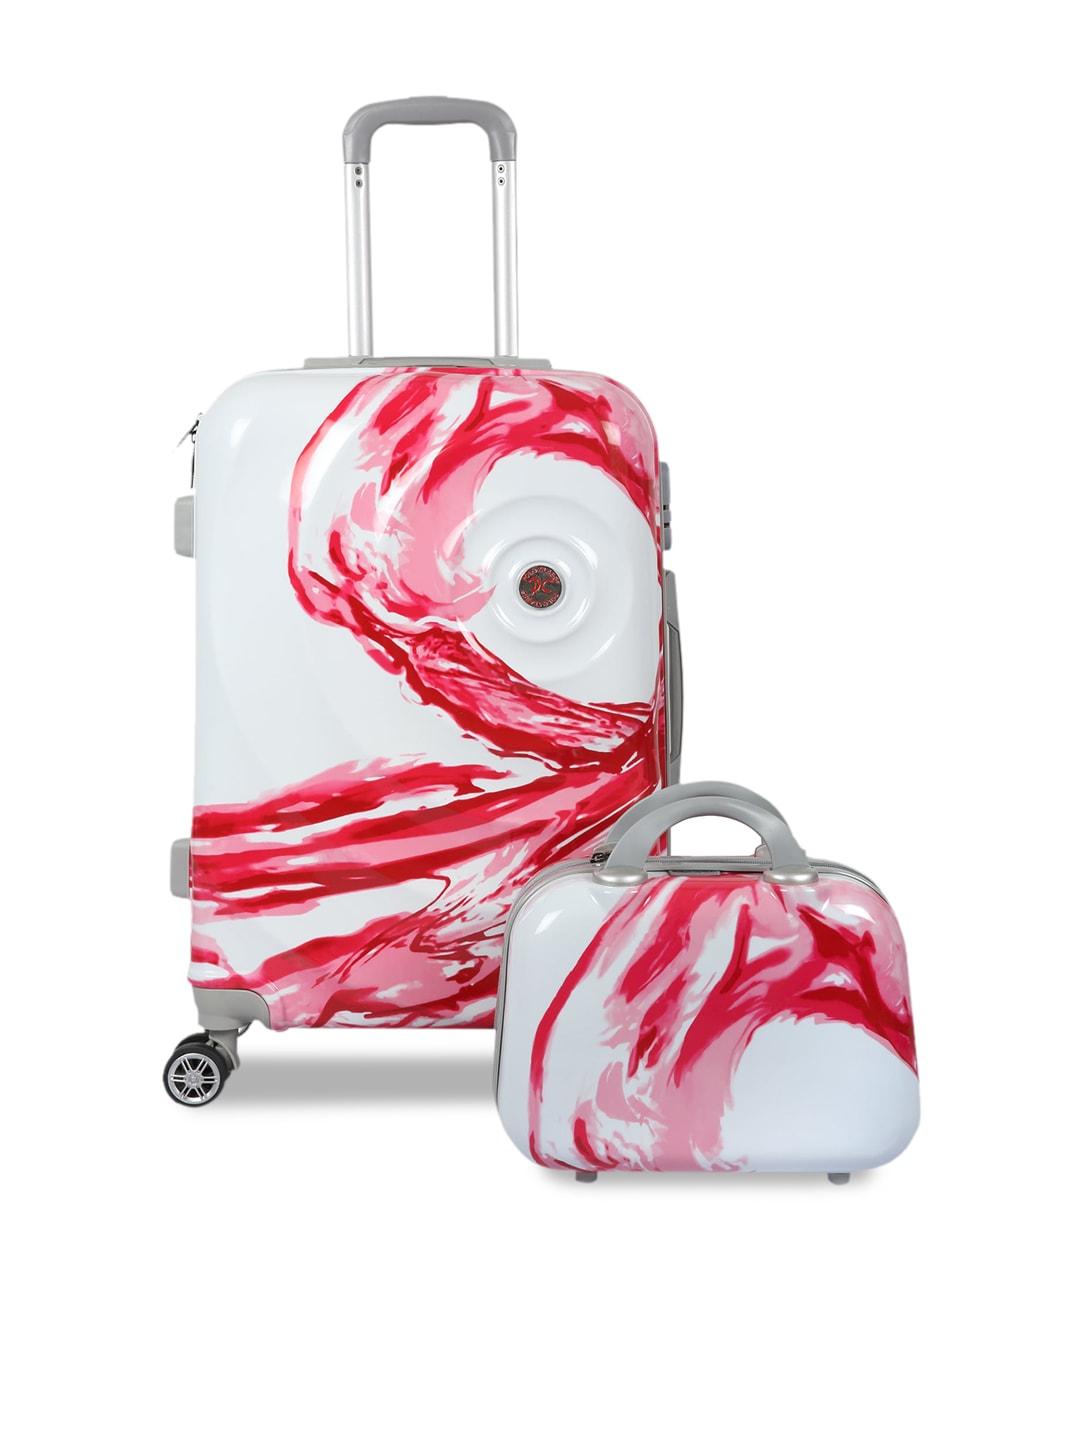 polo-class-red-&-white-24-inch-trolley-bag-with-vanity-bag-60l